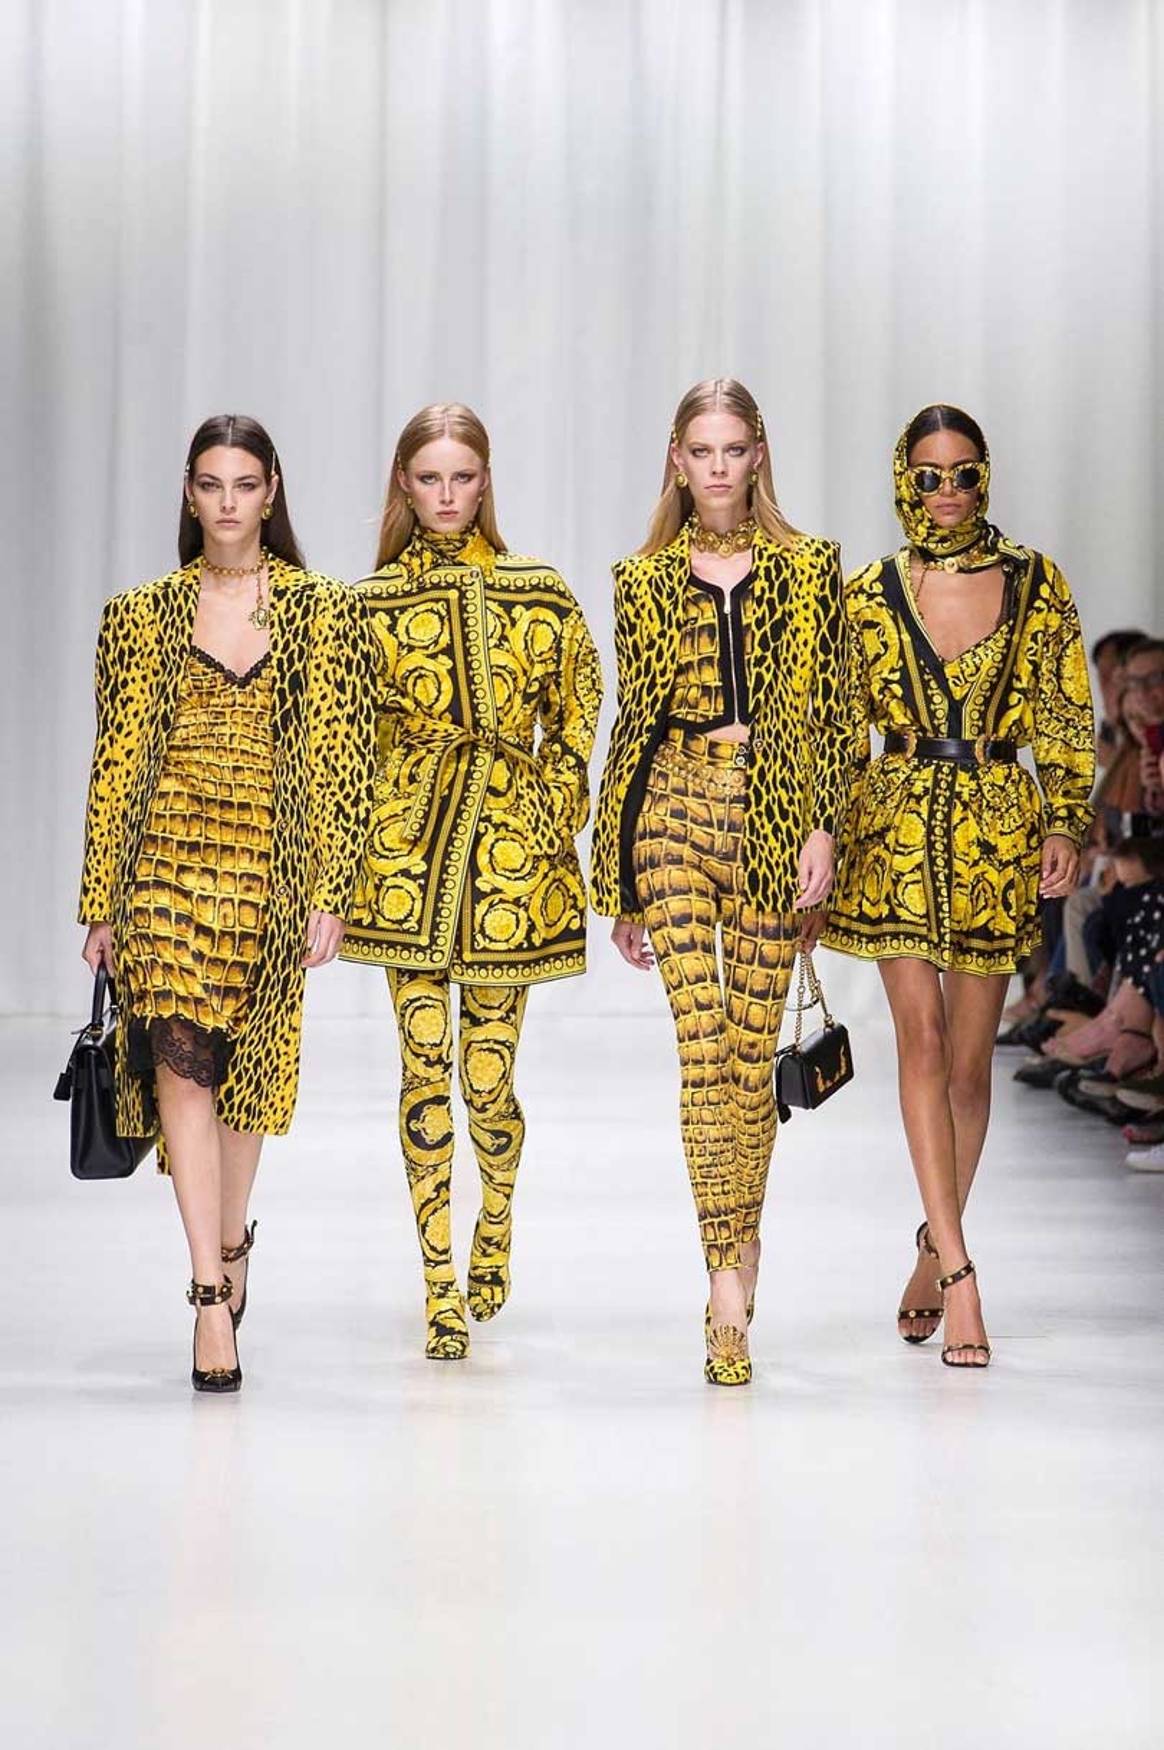 MFW: Versace pays tribute to Gianni Versace